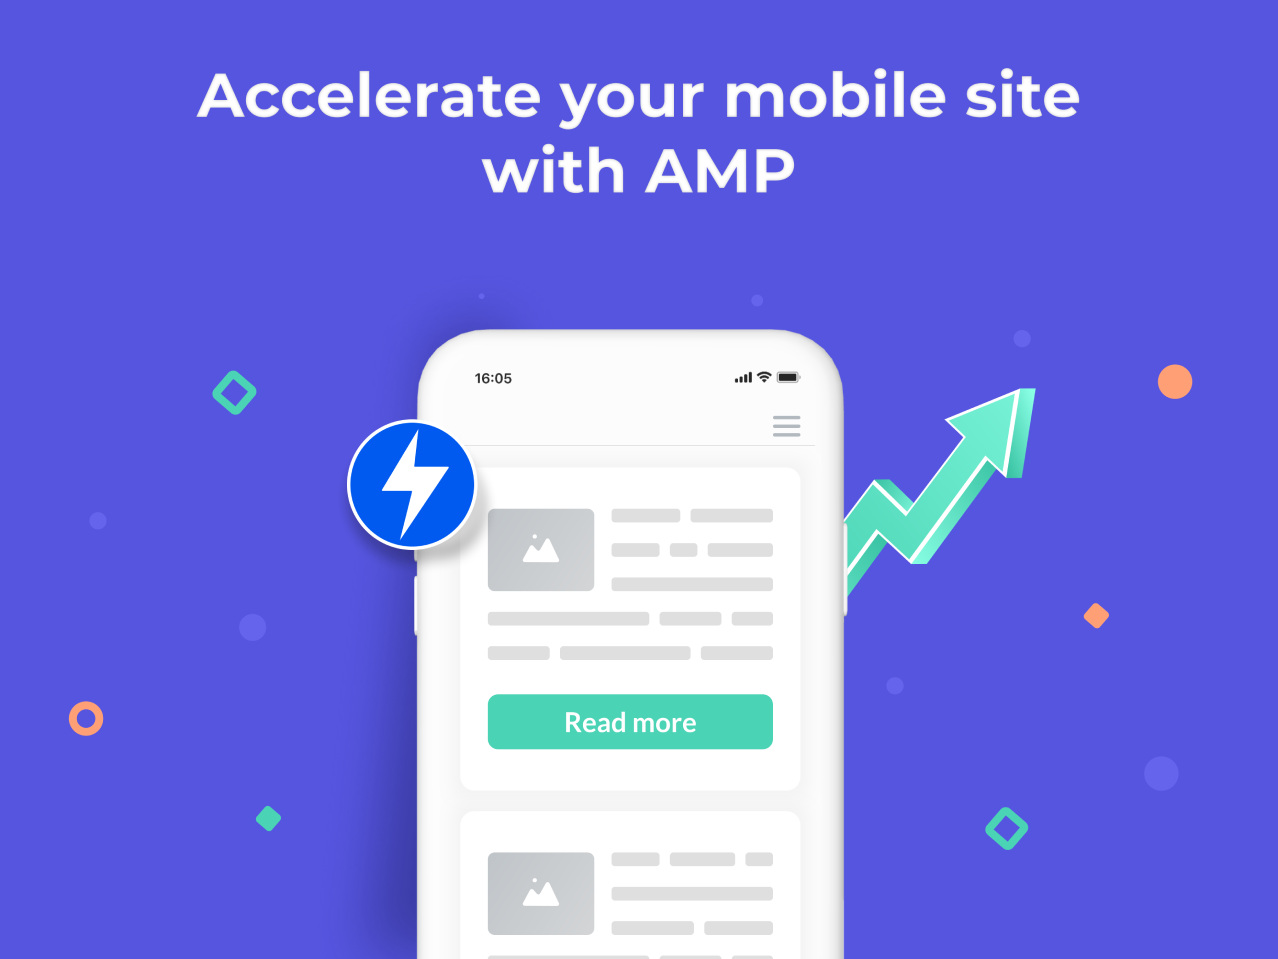 Accelerate your mobile site with AMP